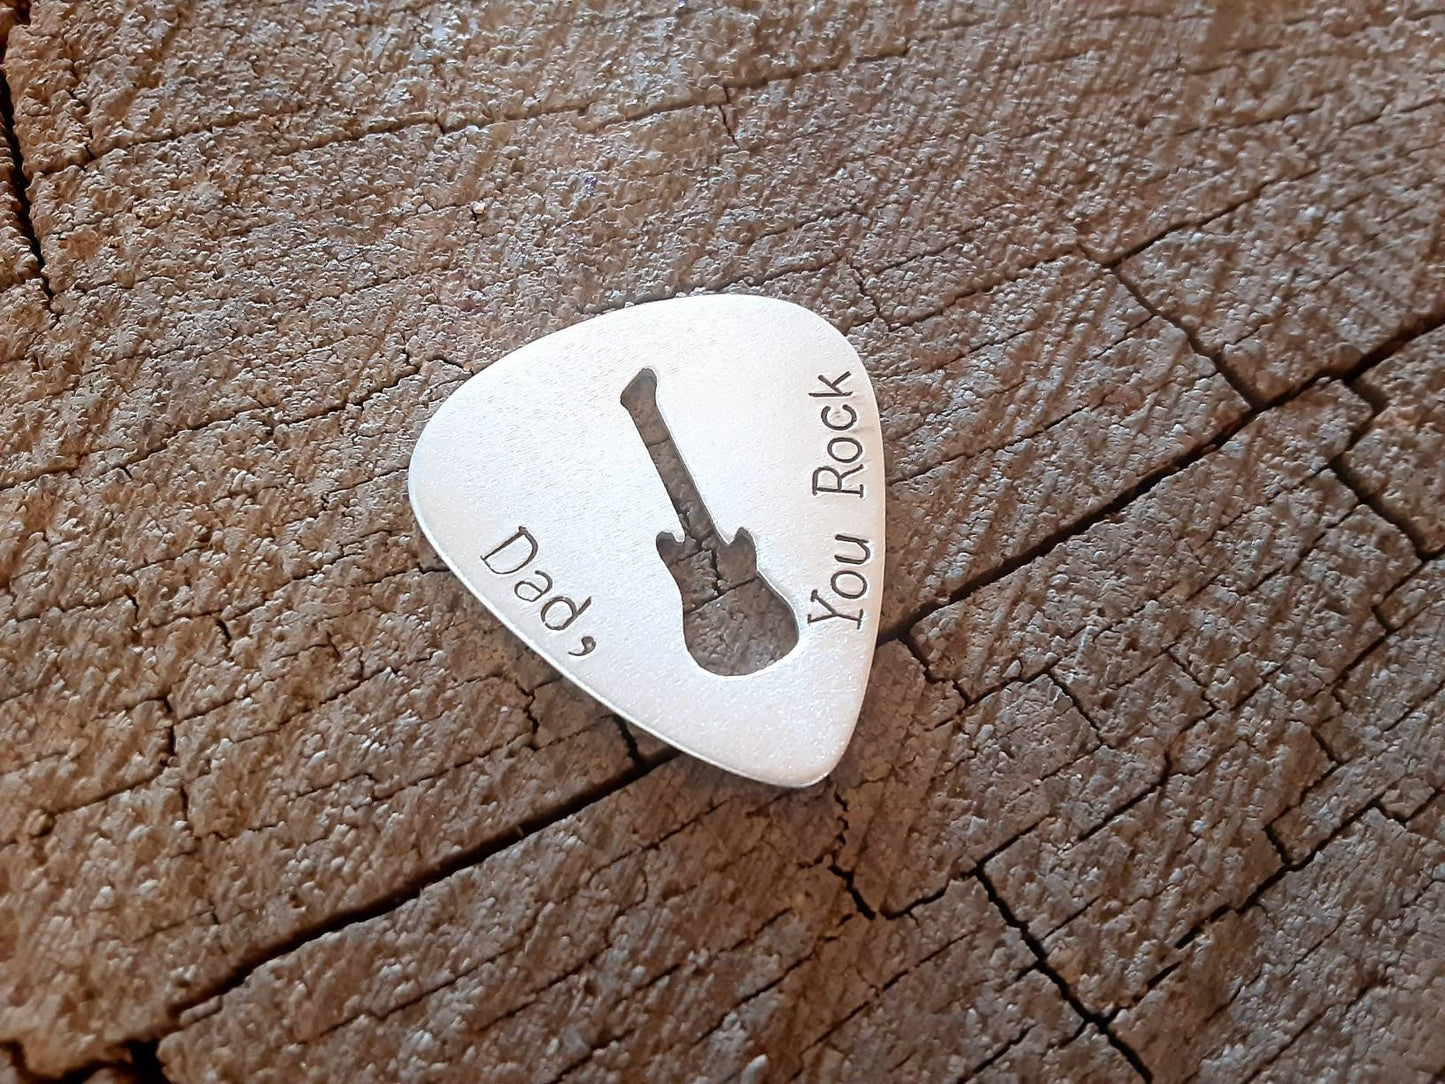 Aluminum guitar pick for dad with guitar cut out for Father's Day or playing guitar